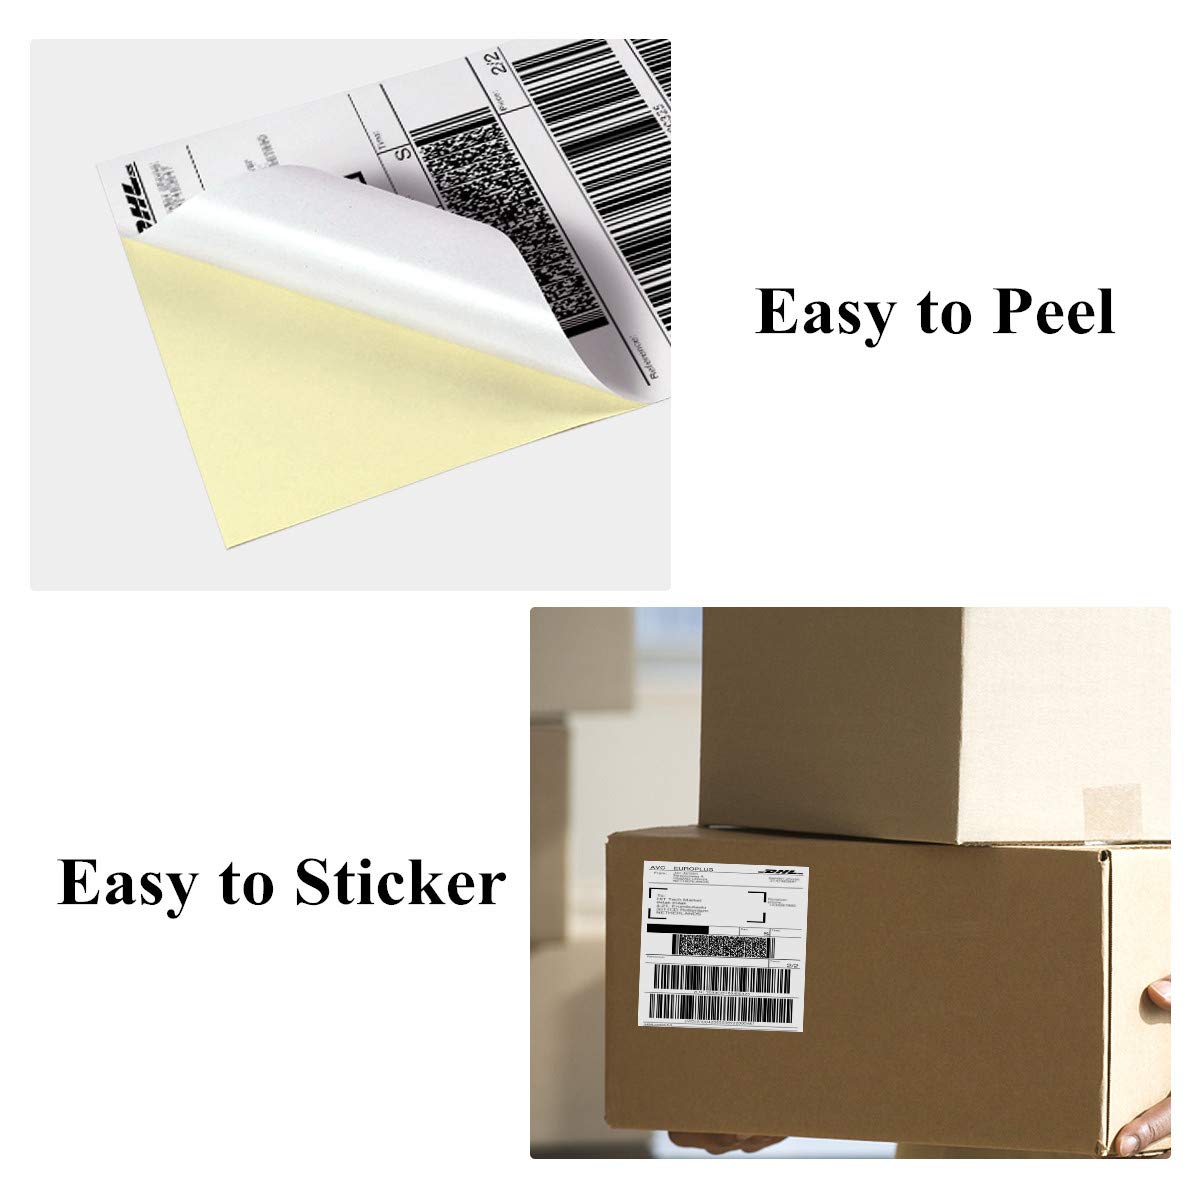 A4 Shipping Labels 100 Sheet 2 per Sheet 210 x 148 mm A4 Matte White Address Labels Self-Adhesive Sticky Back Label Mailing Printing Paper for Laser Inkjet Copier Printer